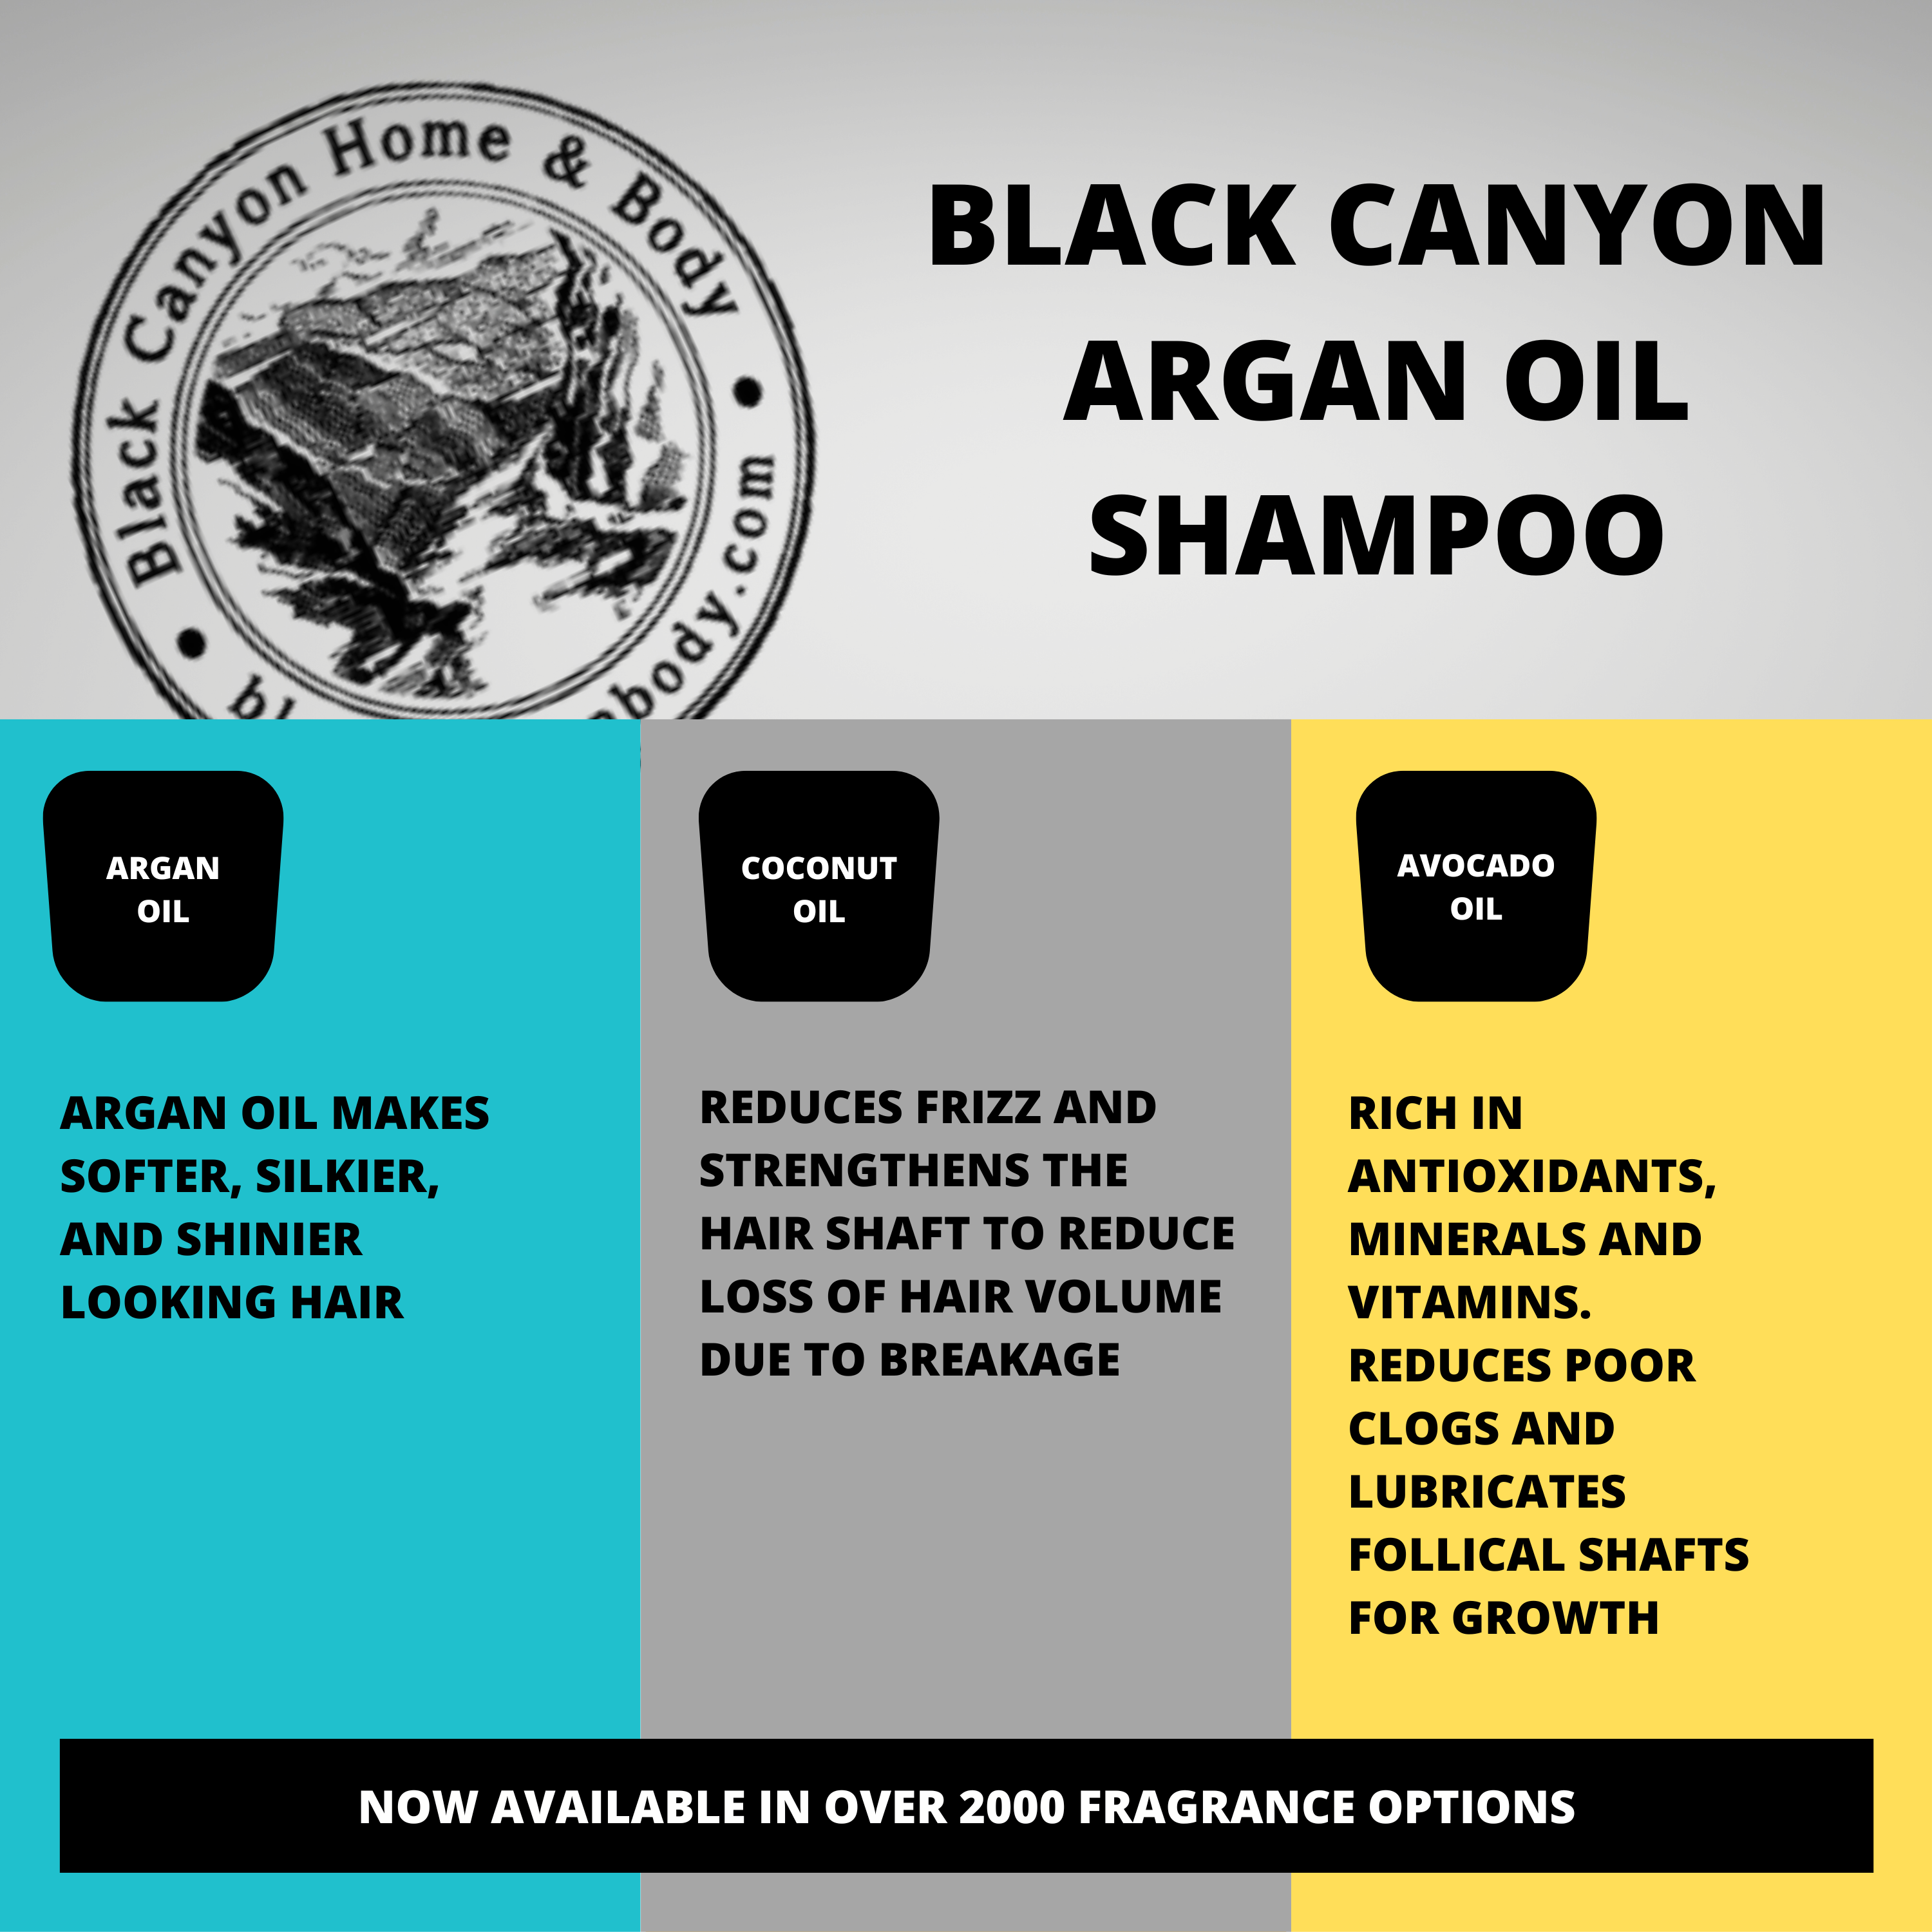 Black Canyon Gingerbread Scented Shampoo with Argan Oil